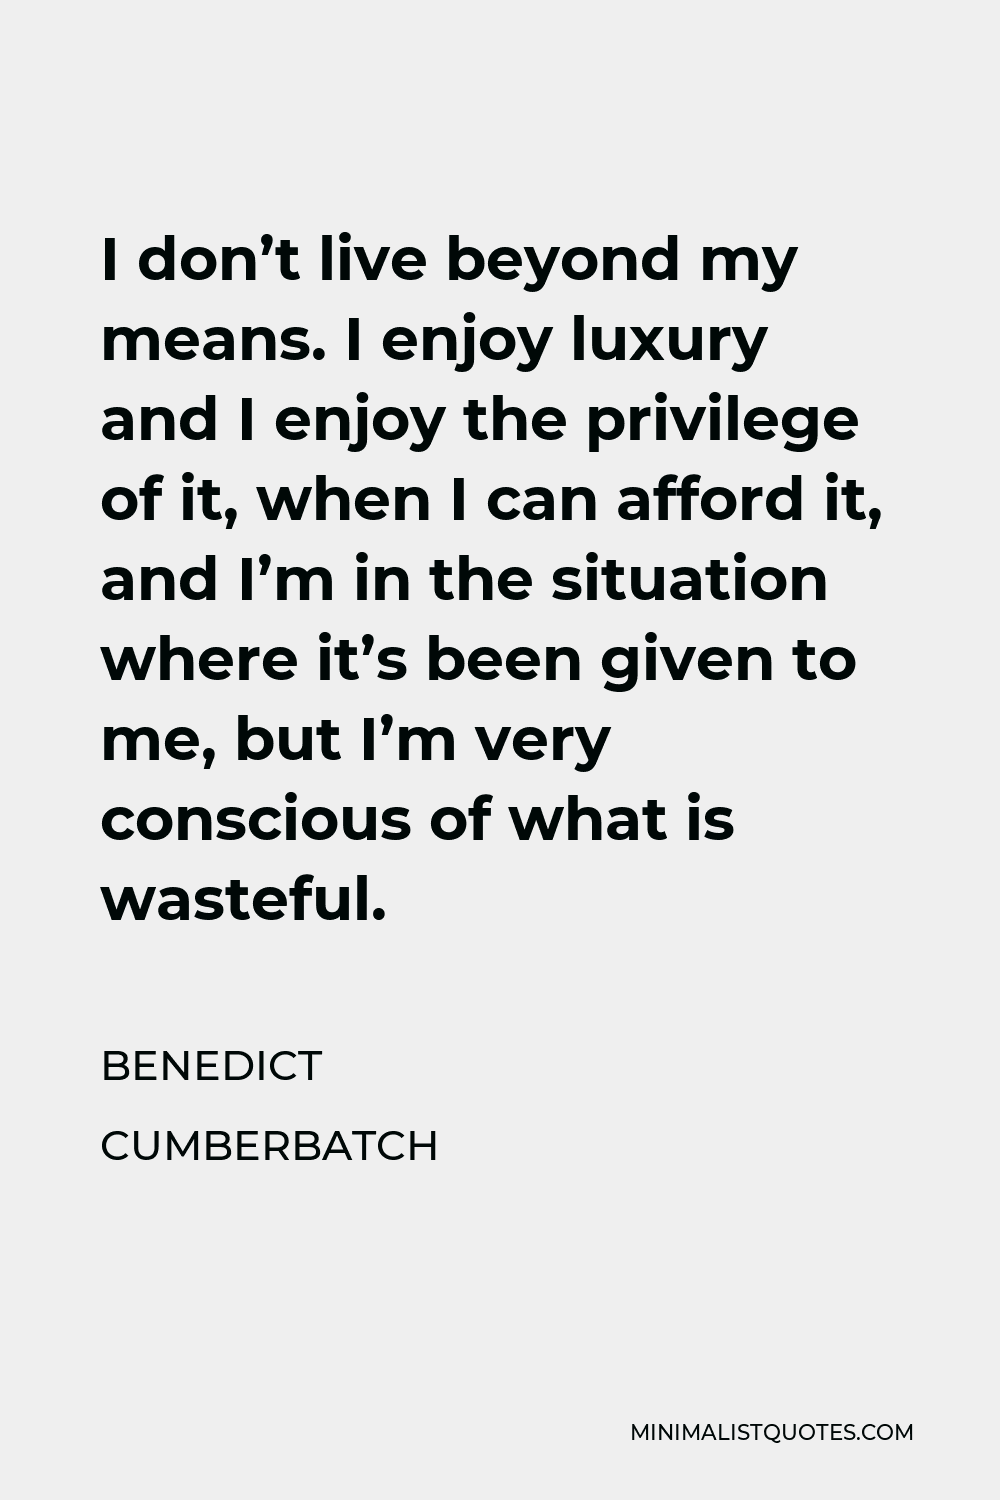 Benedict Cumberbatch Quote - I don’t live beyond my means. I enjoy luxury and I enjoy the privilege of it, when I can afford it, and I’m in the situation where it’s been given to me, but I’m very conscious of what is wasteful.